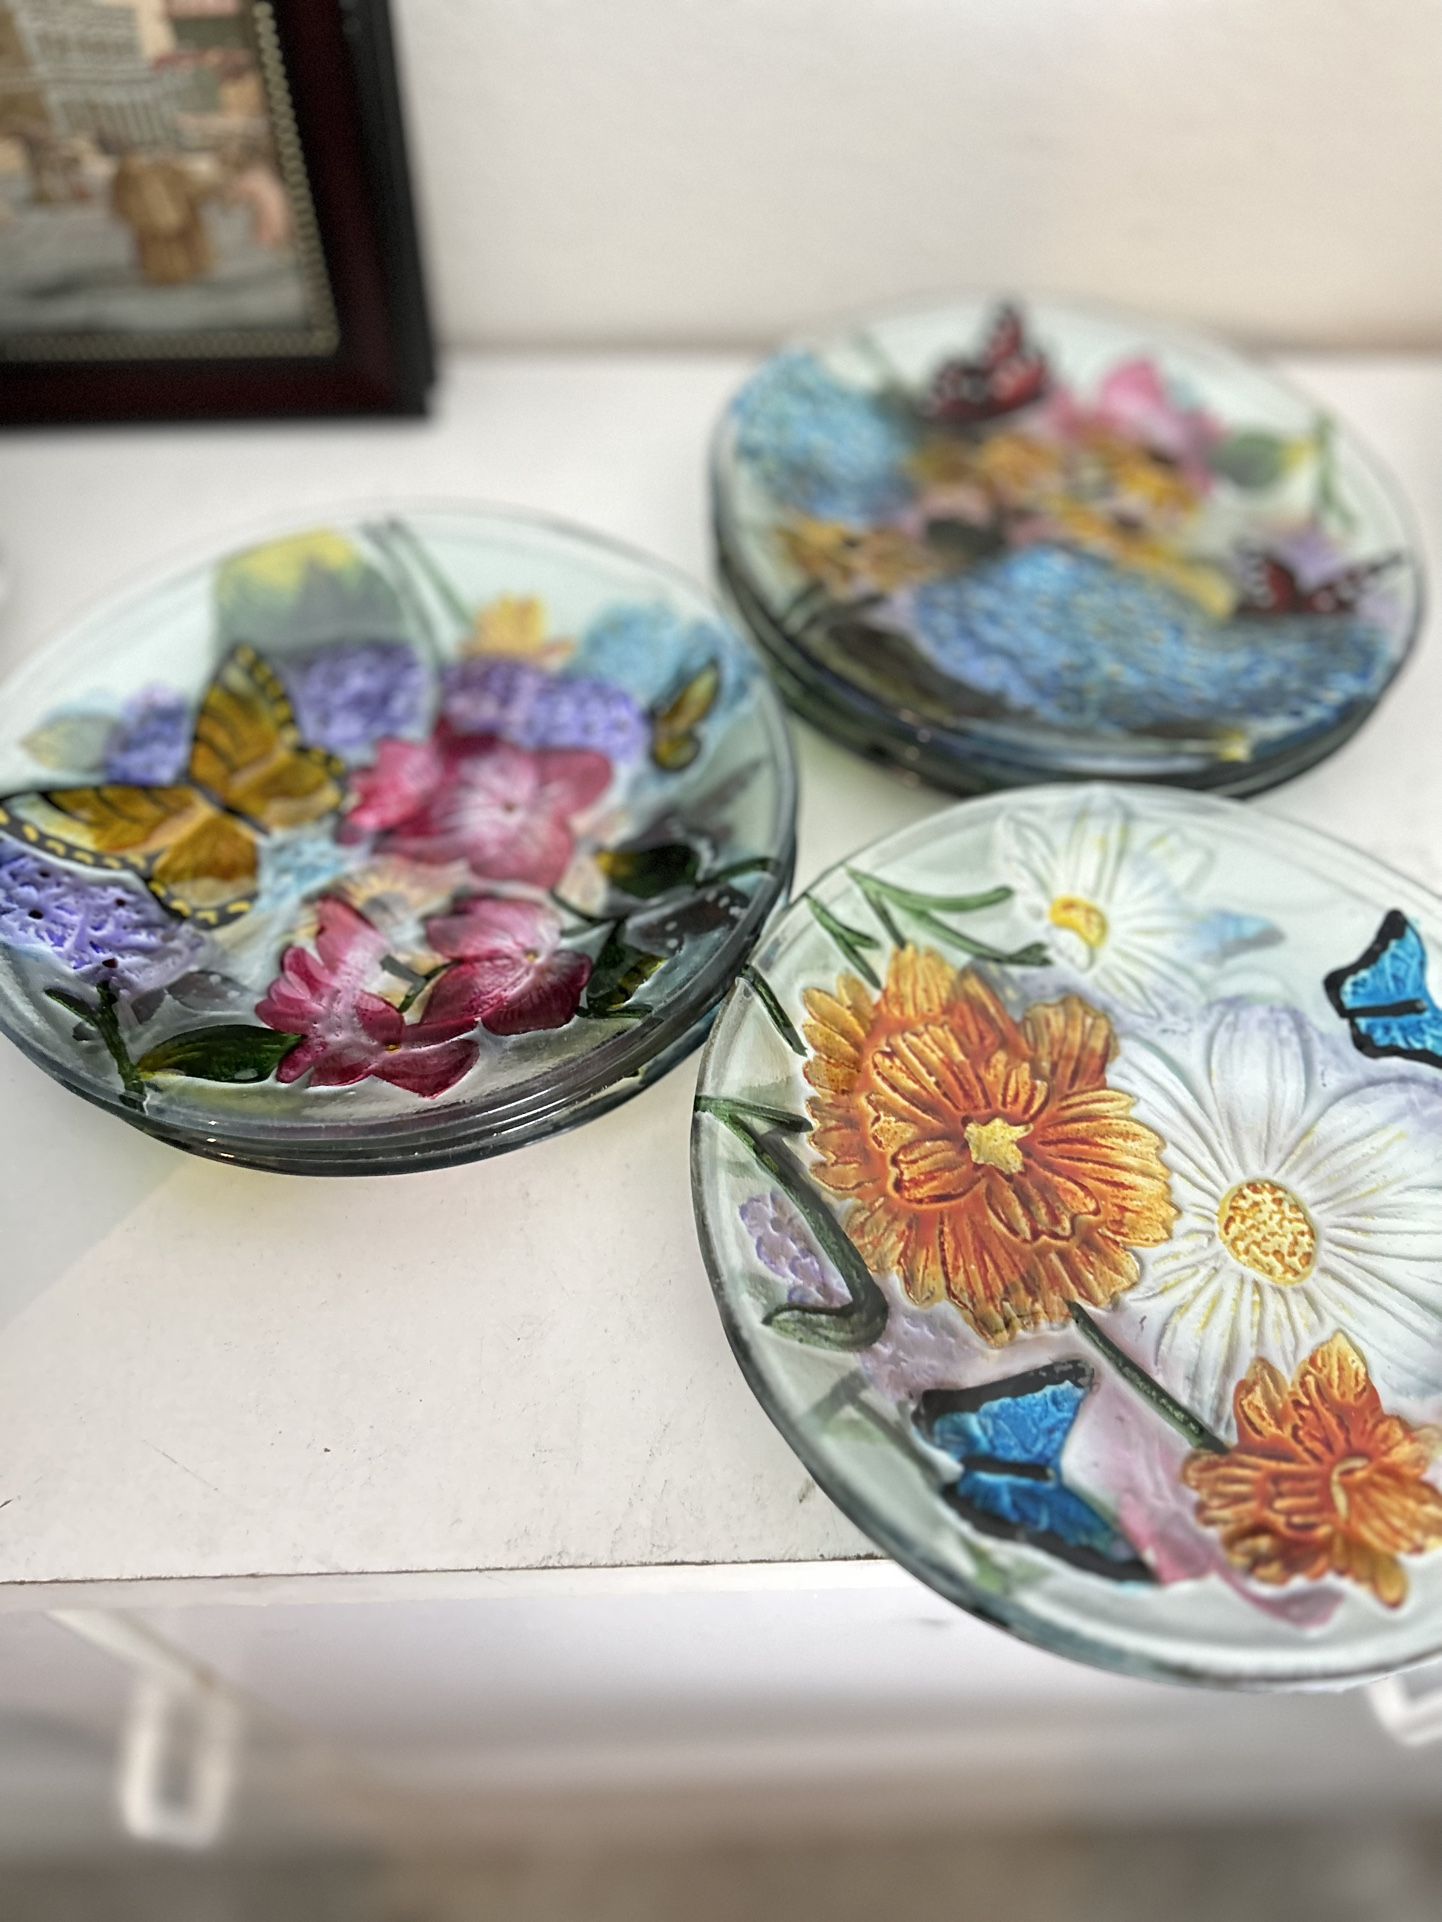 10 Beautiful Decorated With Flowers And Butterflies Transparent Glass Plates